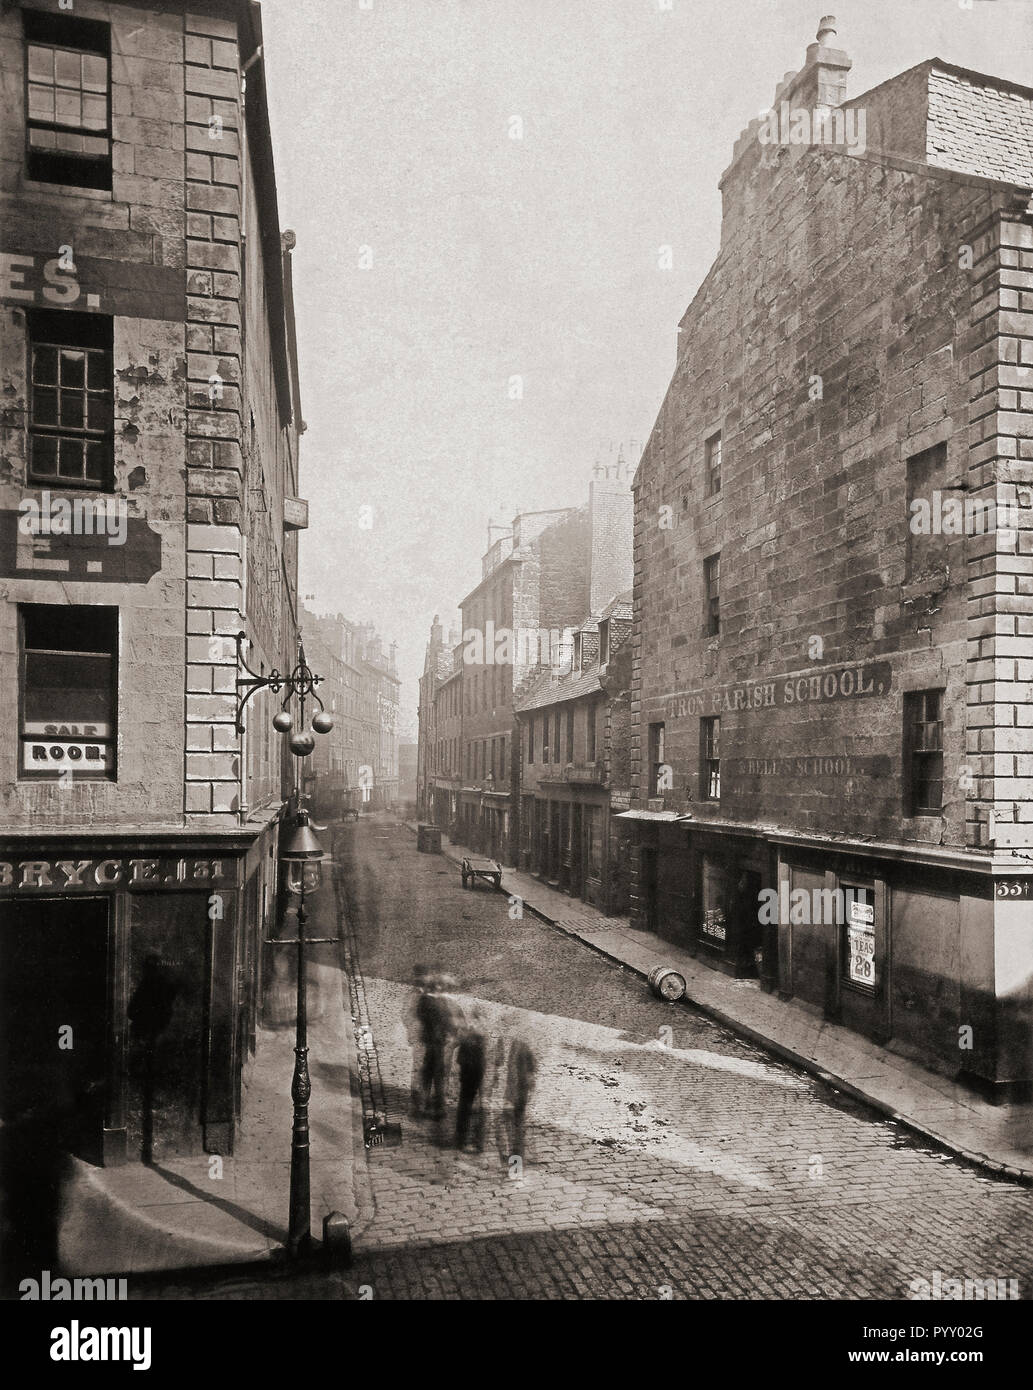 Princes Street seen from King Street, Glasgow, Scotland in the 1870’s. Photograph from The Old Closes and Streets of Glasgow, by Scottish photographer Thomas Annan 1829-1887. Stock Photo